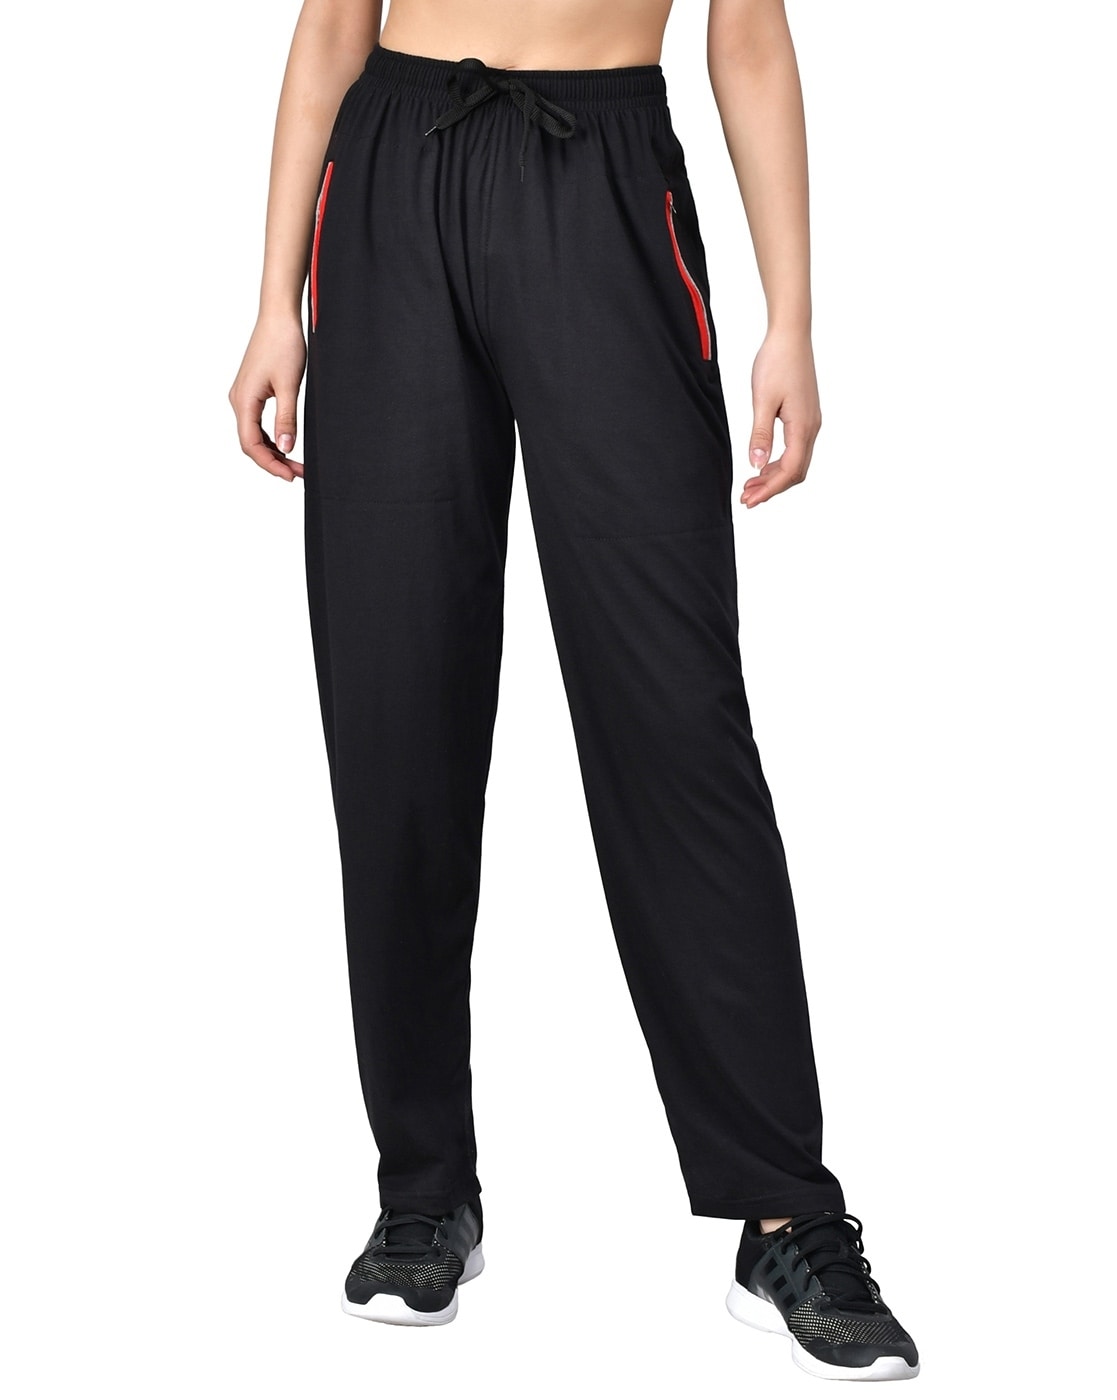 Buy Black Track Pants for Women by MAX Online | Ajio.com